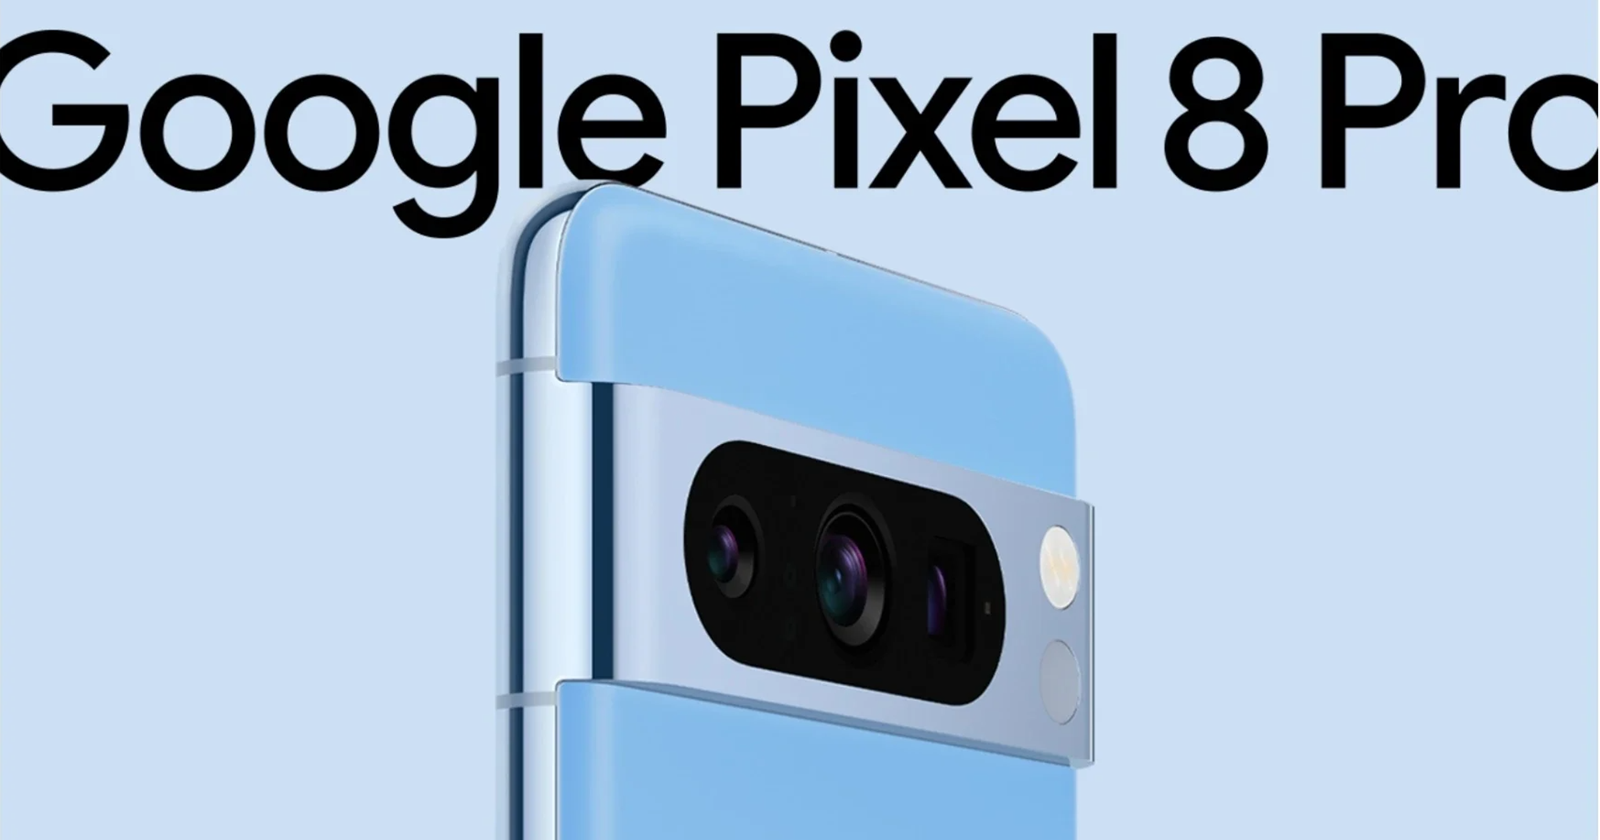 You can save up to AUD 350 ($238.46) on the Google Pixel 8 series at JB HI-FI's End of Year Madness Sale in Australia